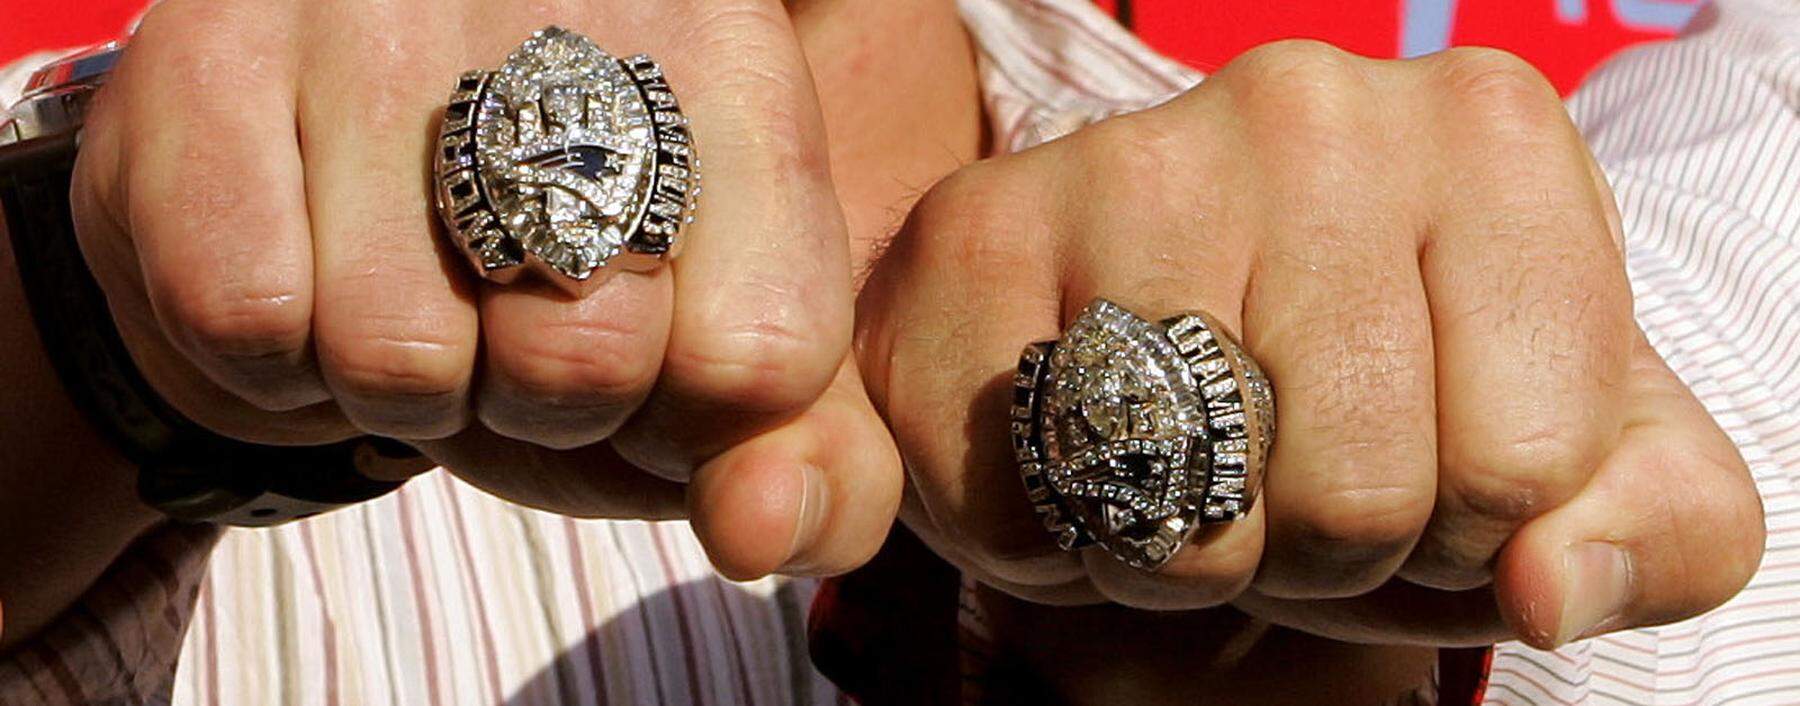 New England Patriots Koppen, Izzo and Paxton show Super Bowl rings at ESPY Awards pre-party at Playboy ...